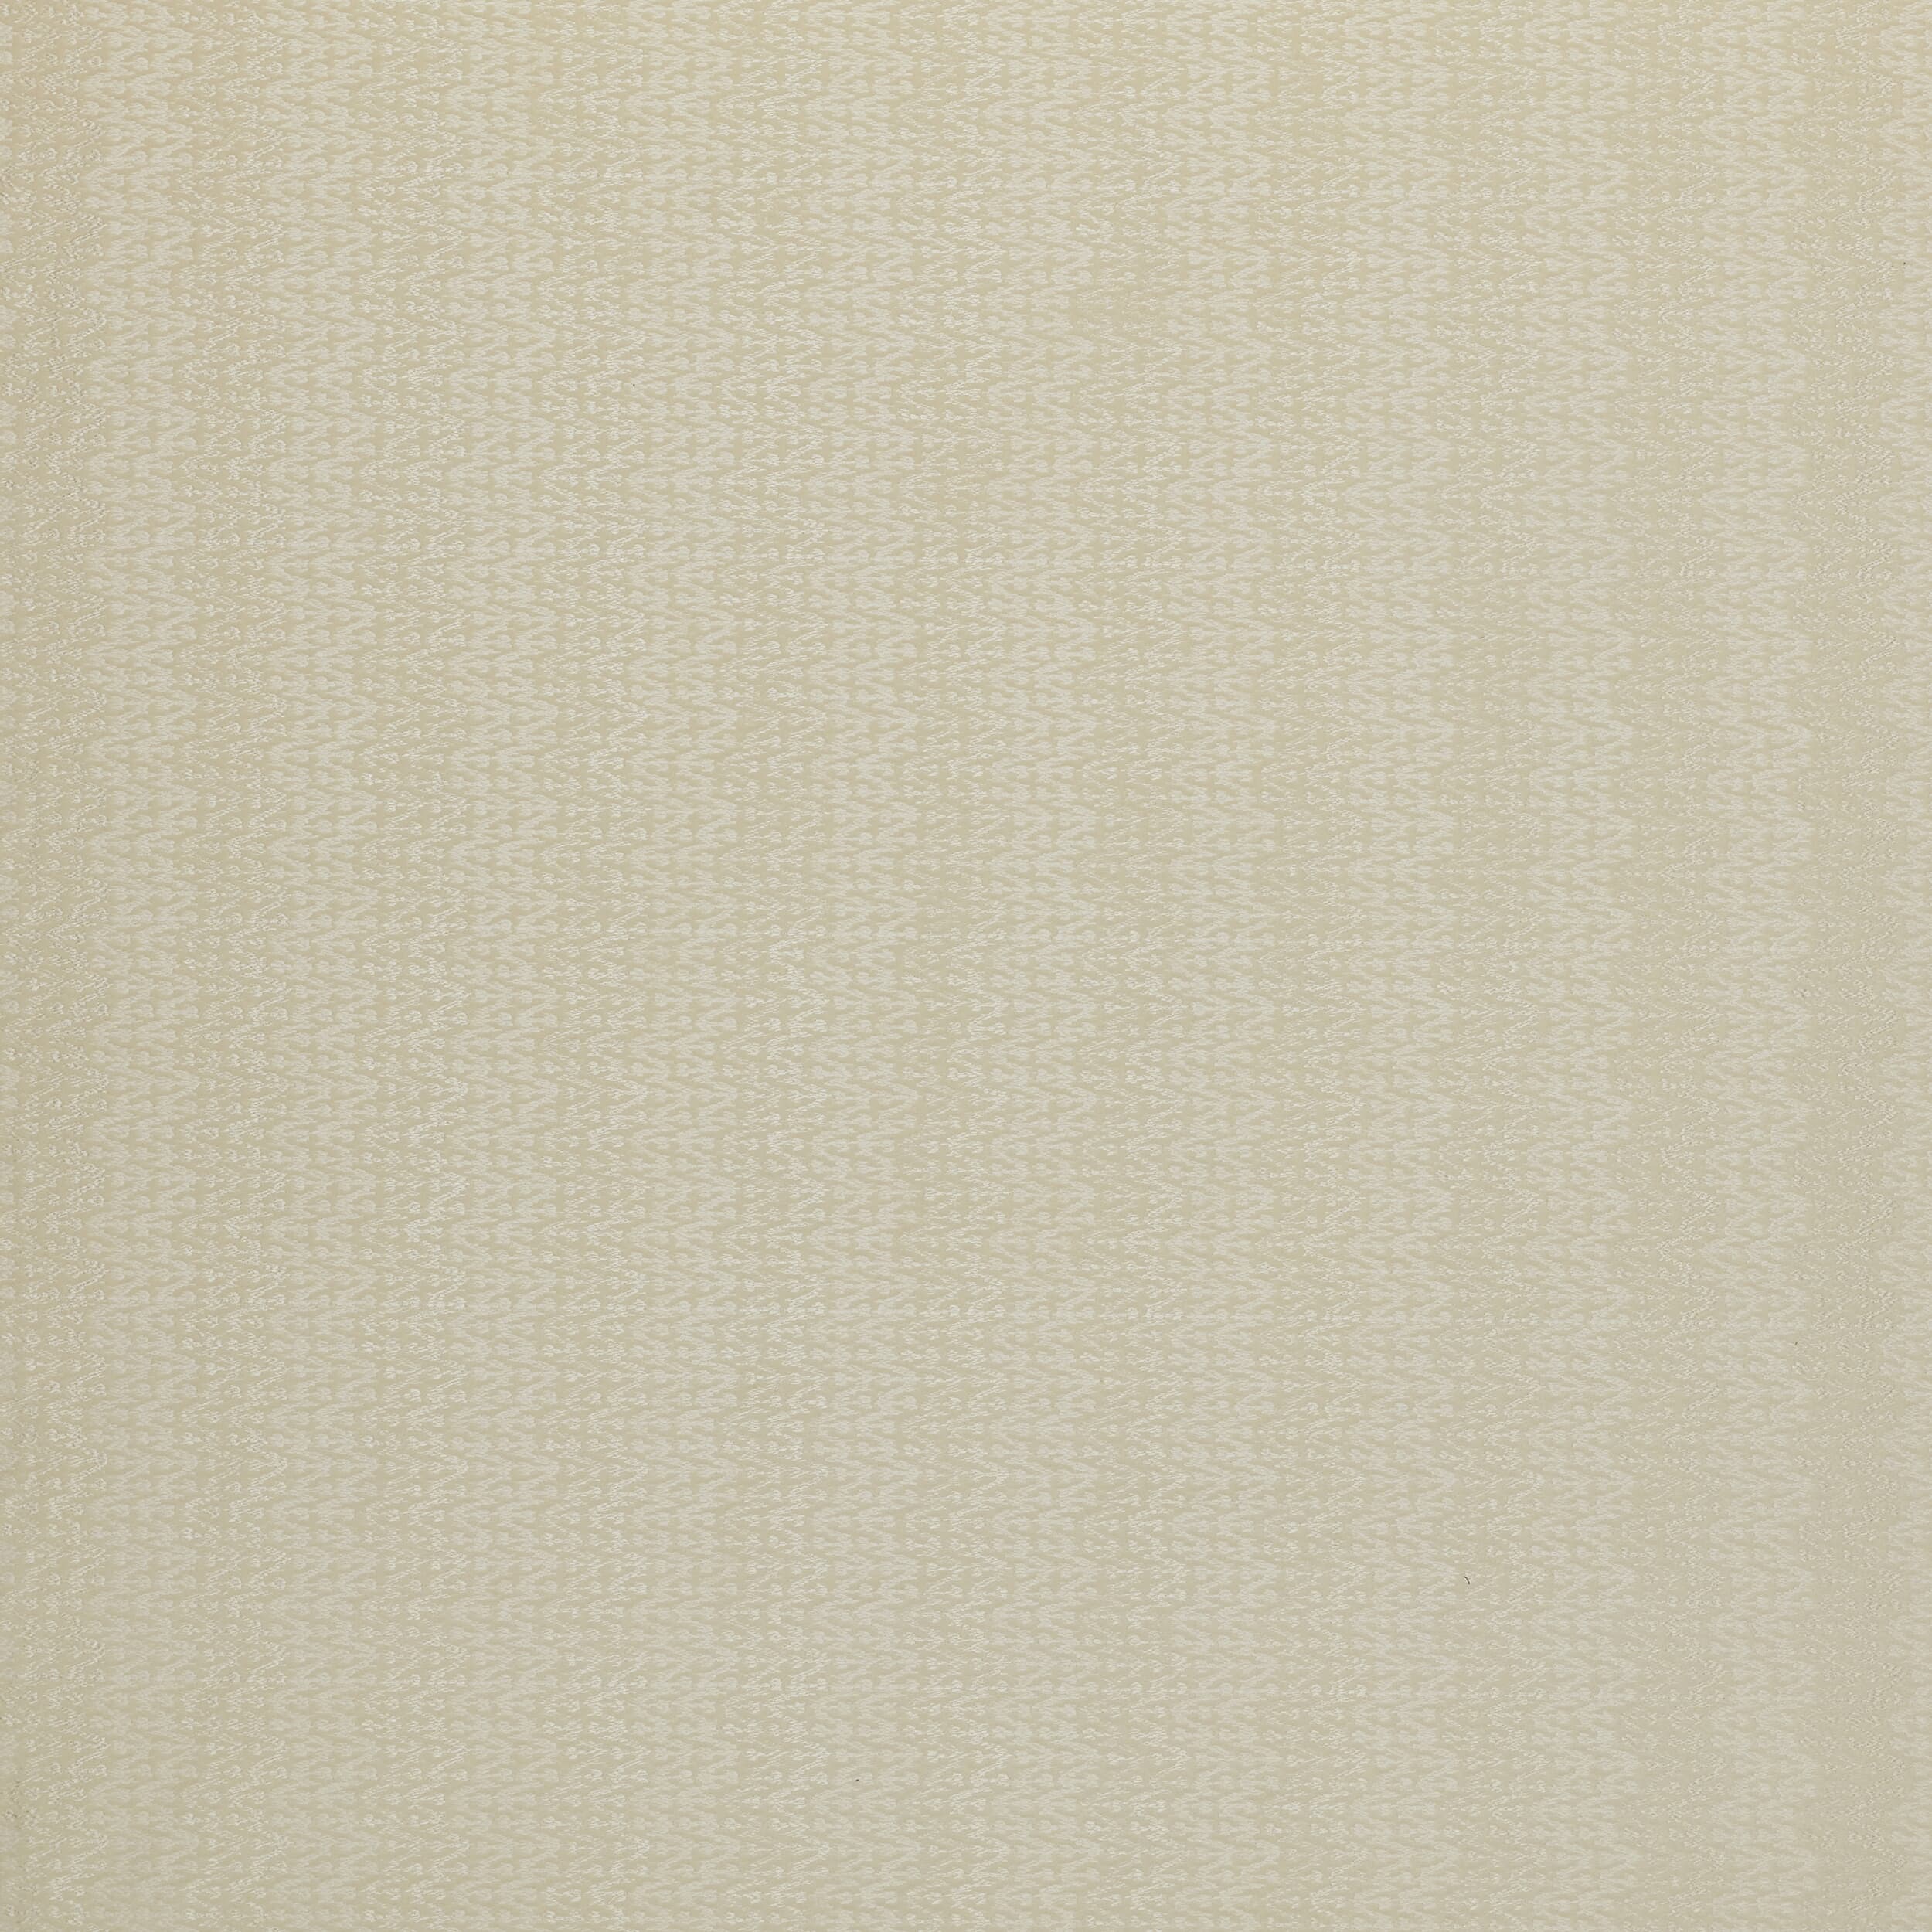 Ferel 3 Champagne by Stout Fabric